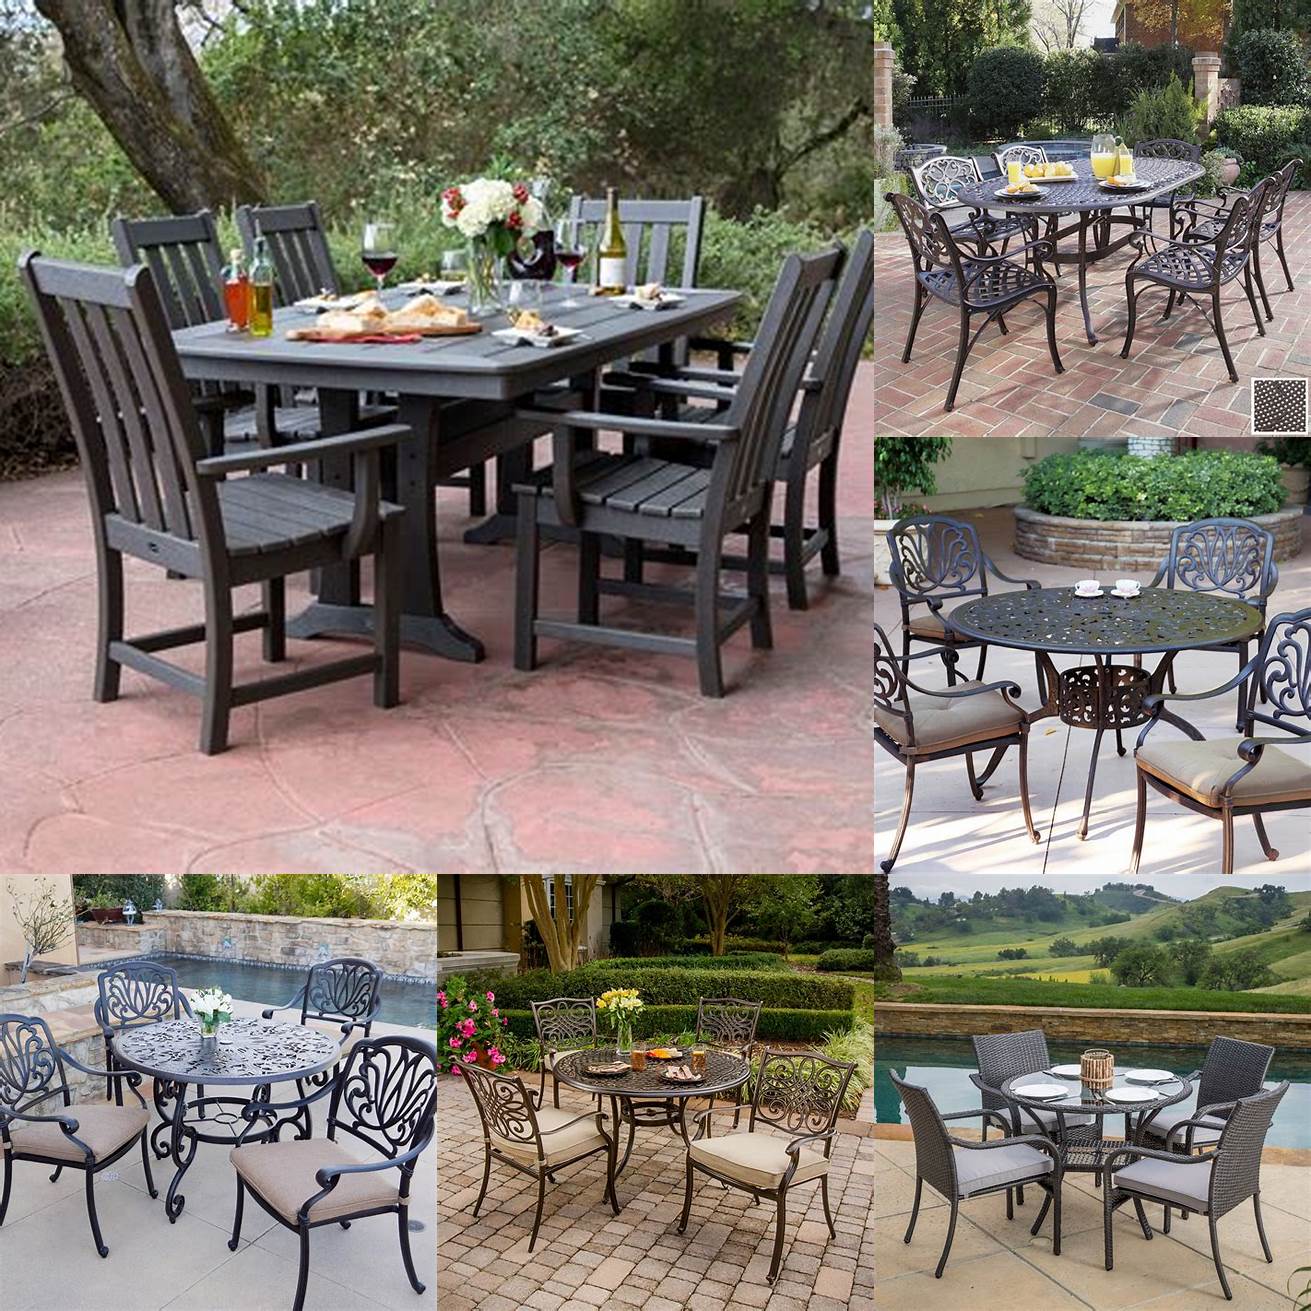 A traditional outdoor dining set